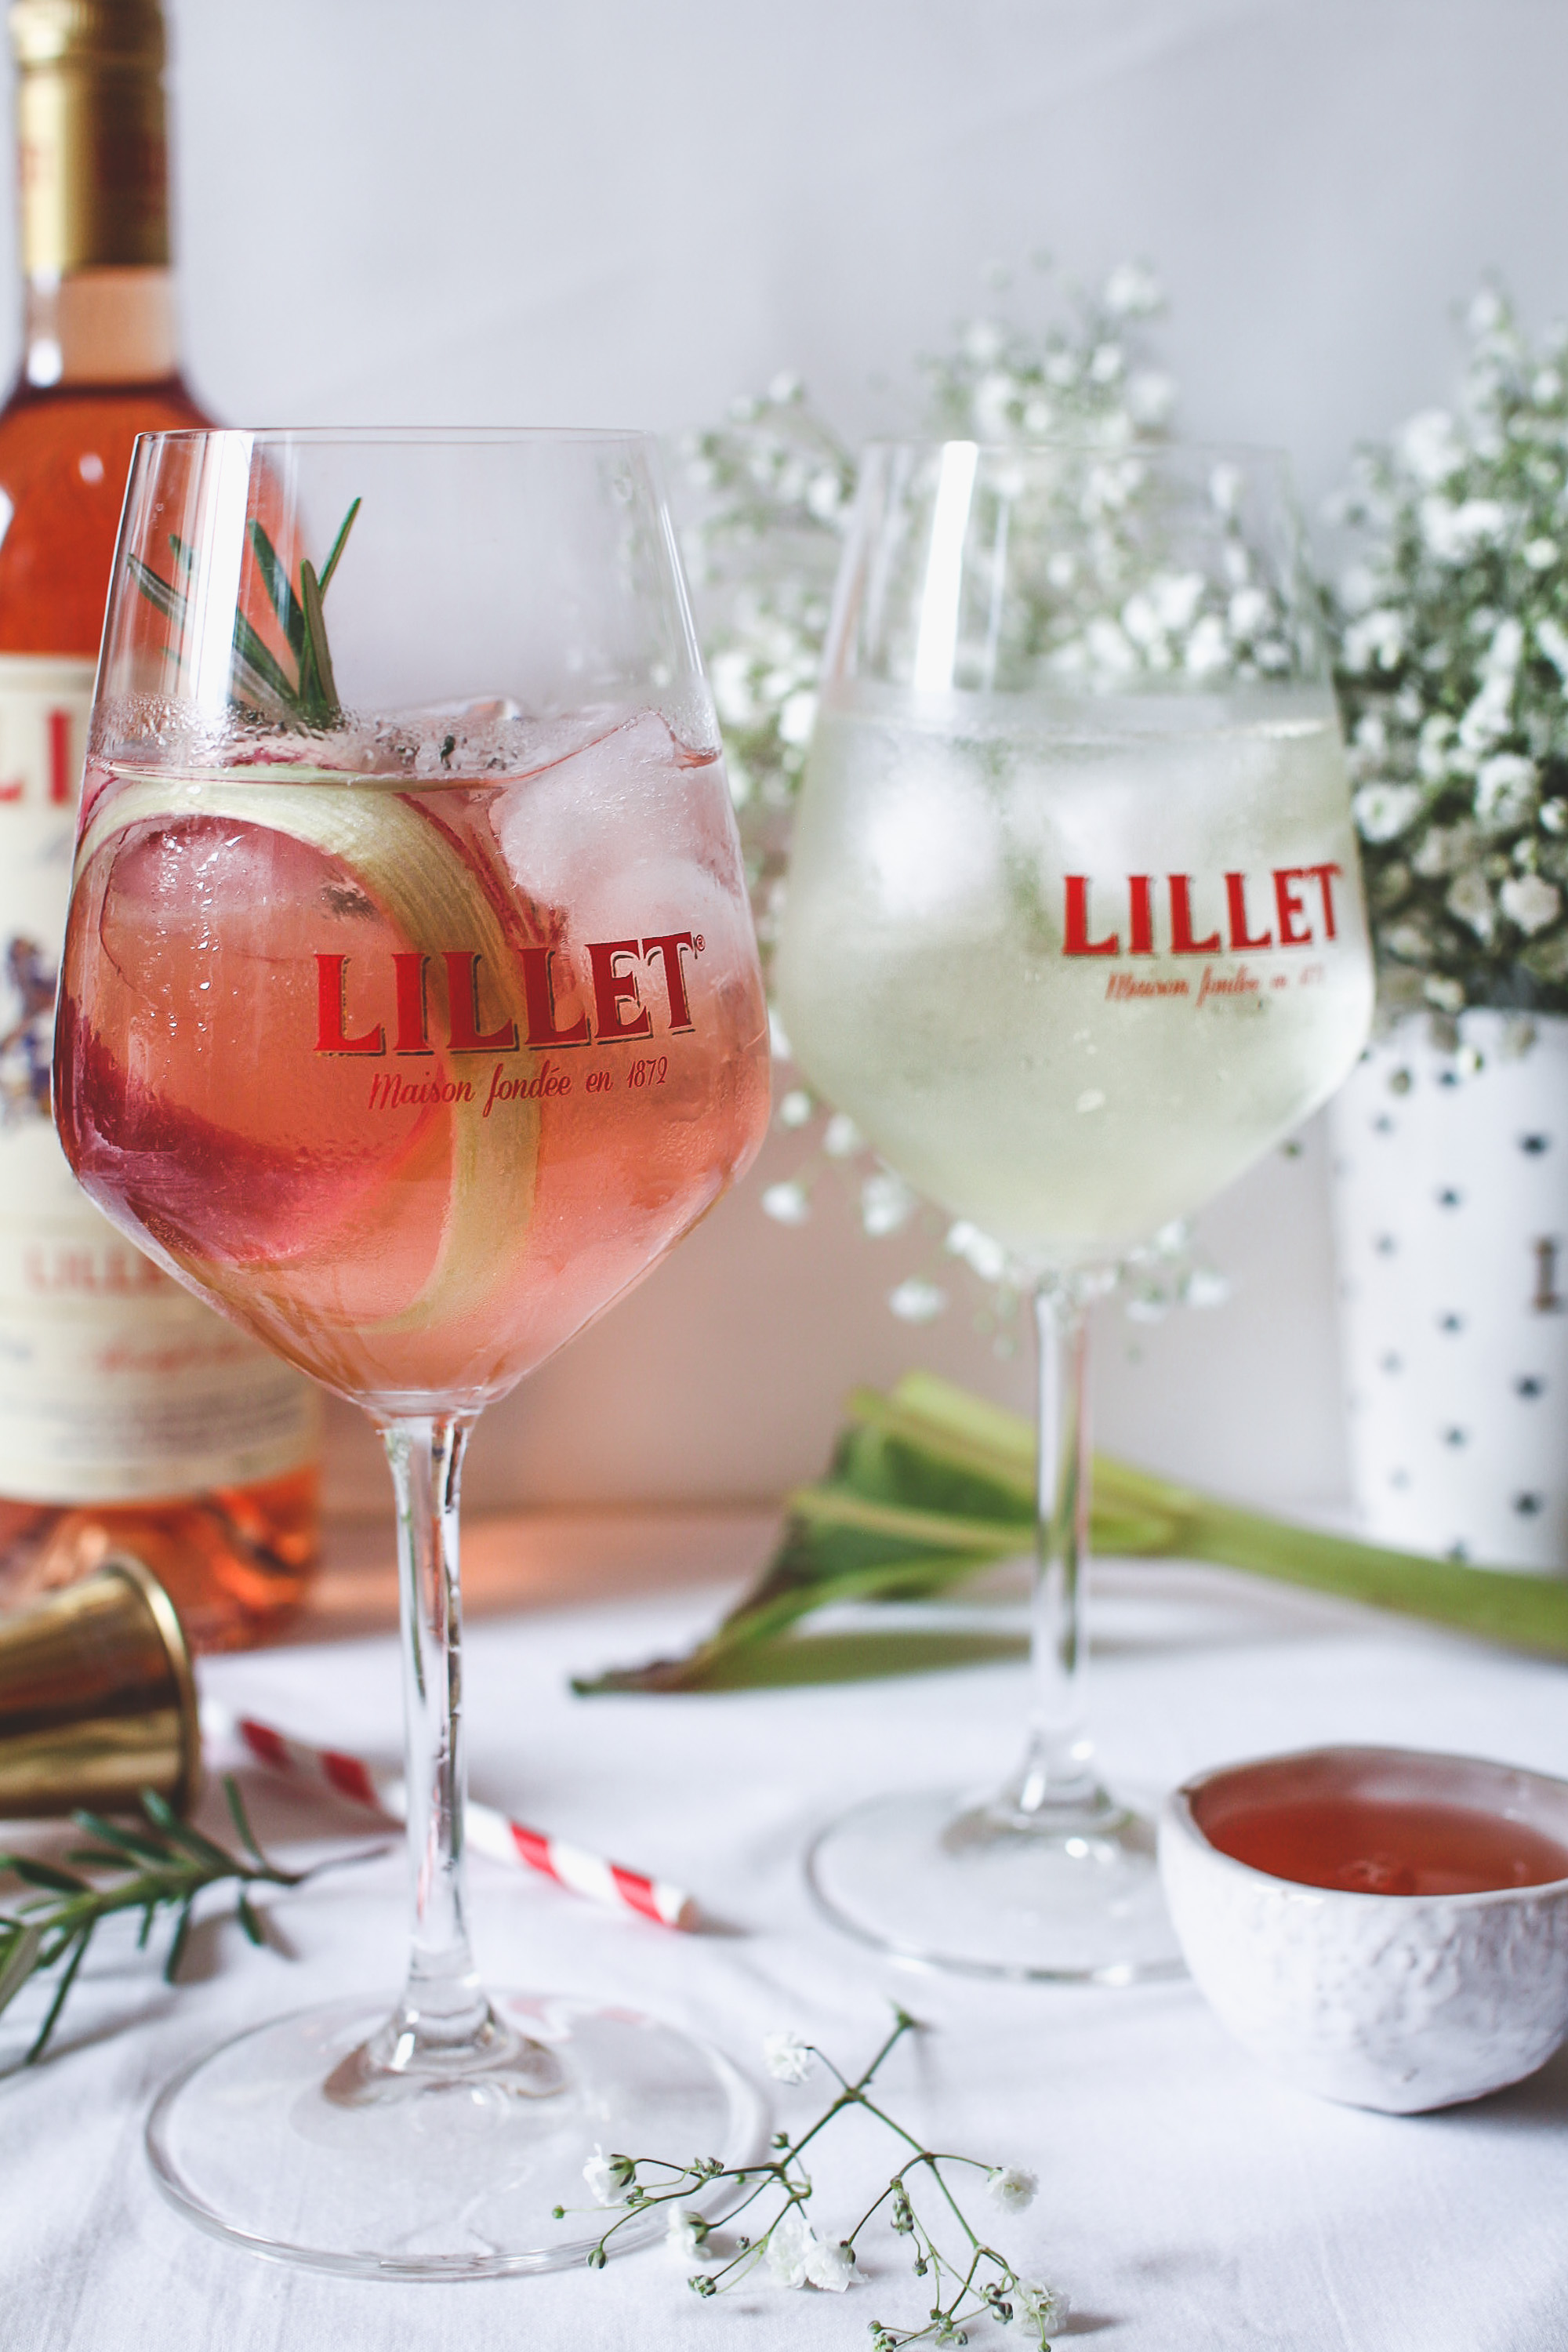 Lillet tonic cocktail - Tracy Luce